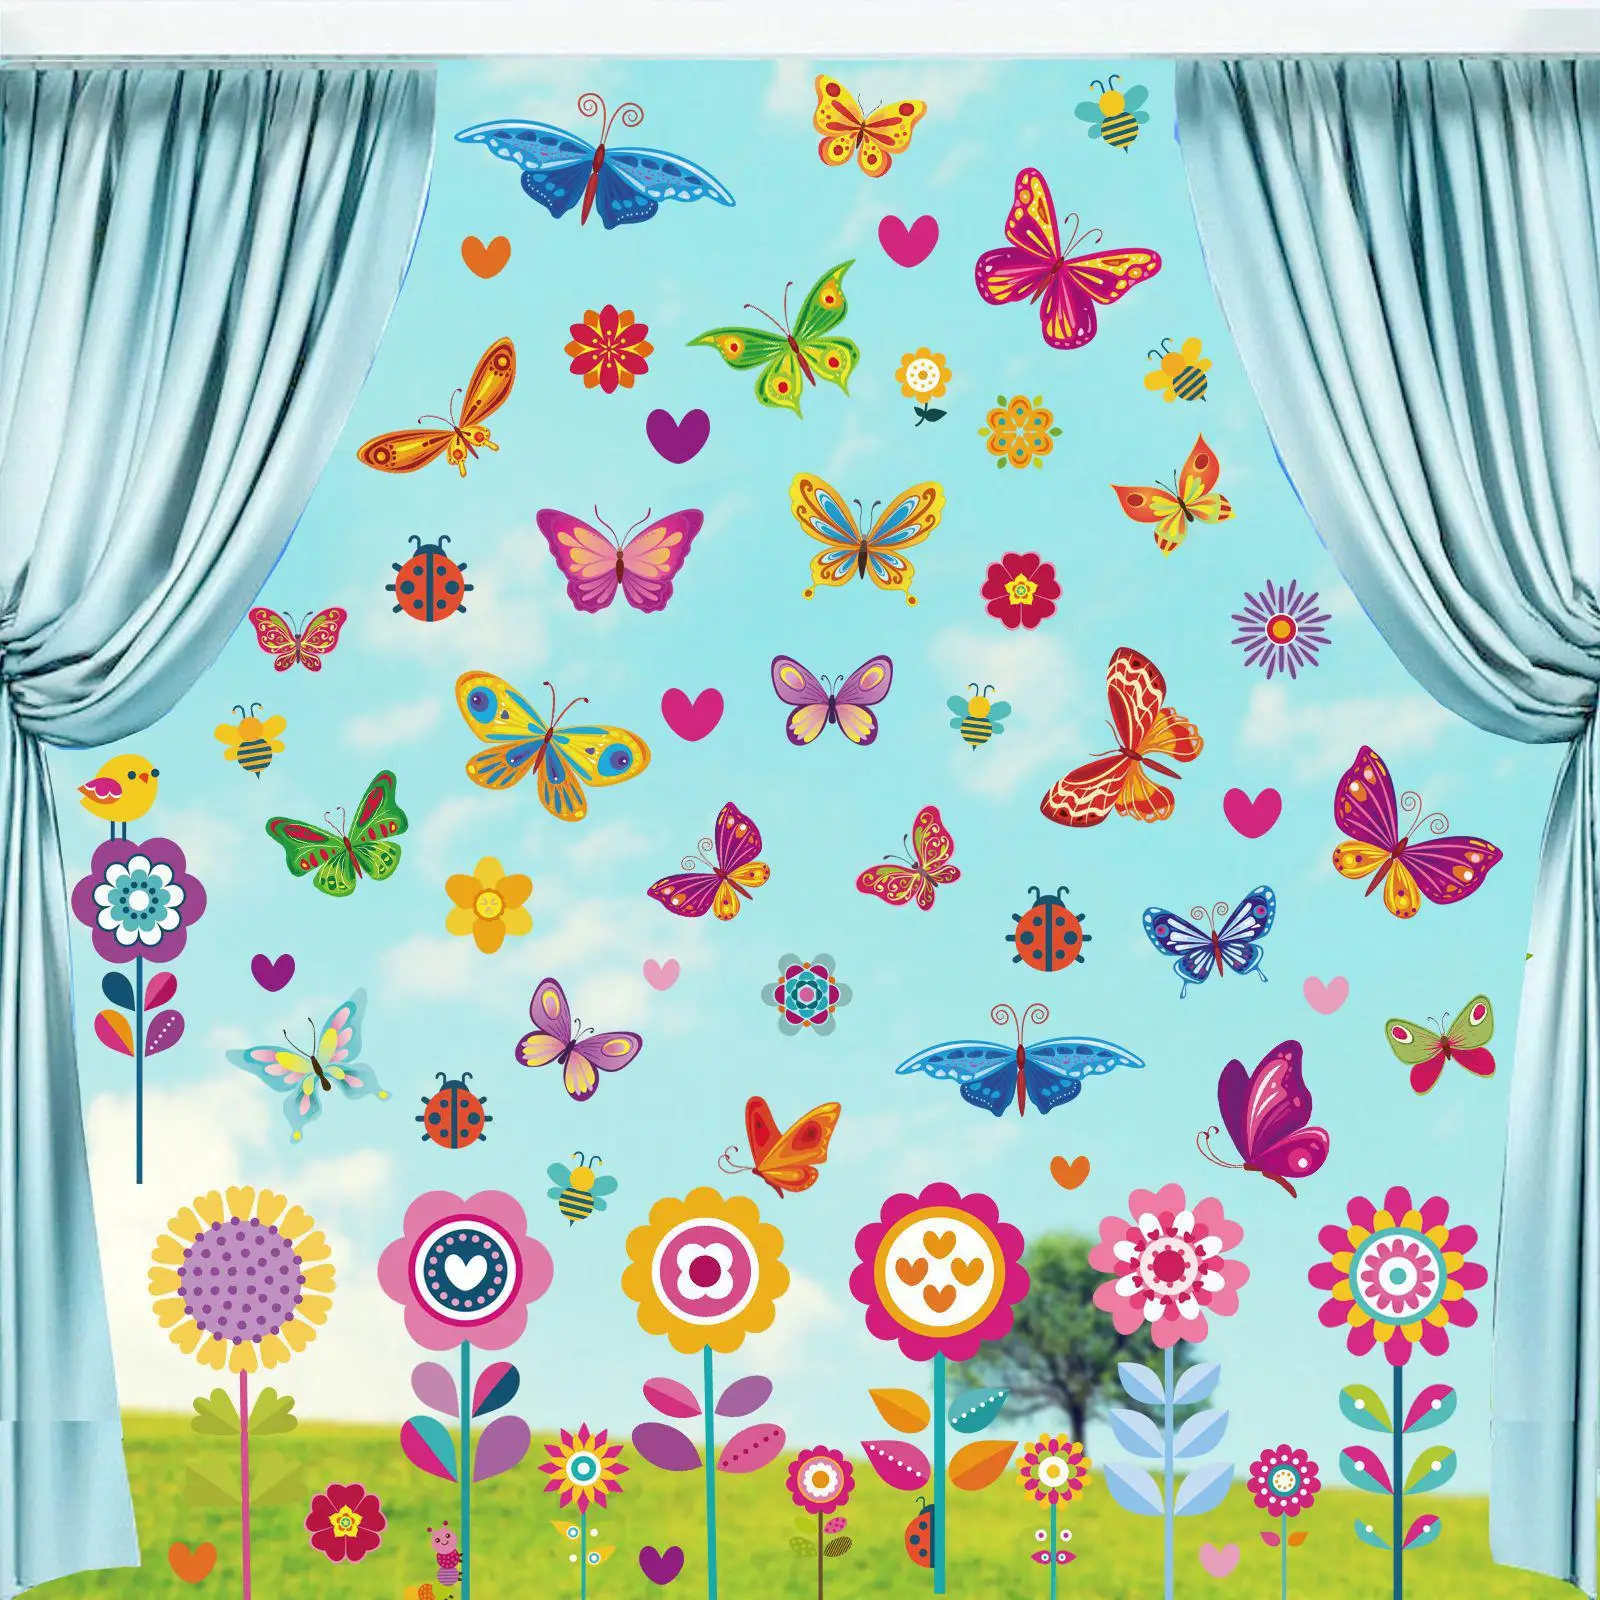 9Pcs Double-Sided Window Stickers DIY Crafts Butterfly Flower Static Non-Adhesive Glass Sticker for Glass Window Door Home Decor